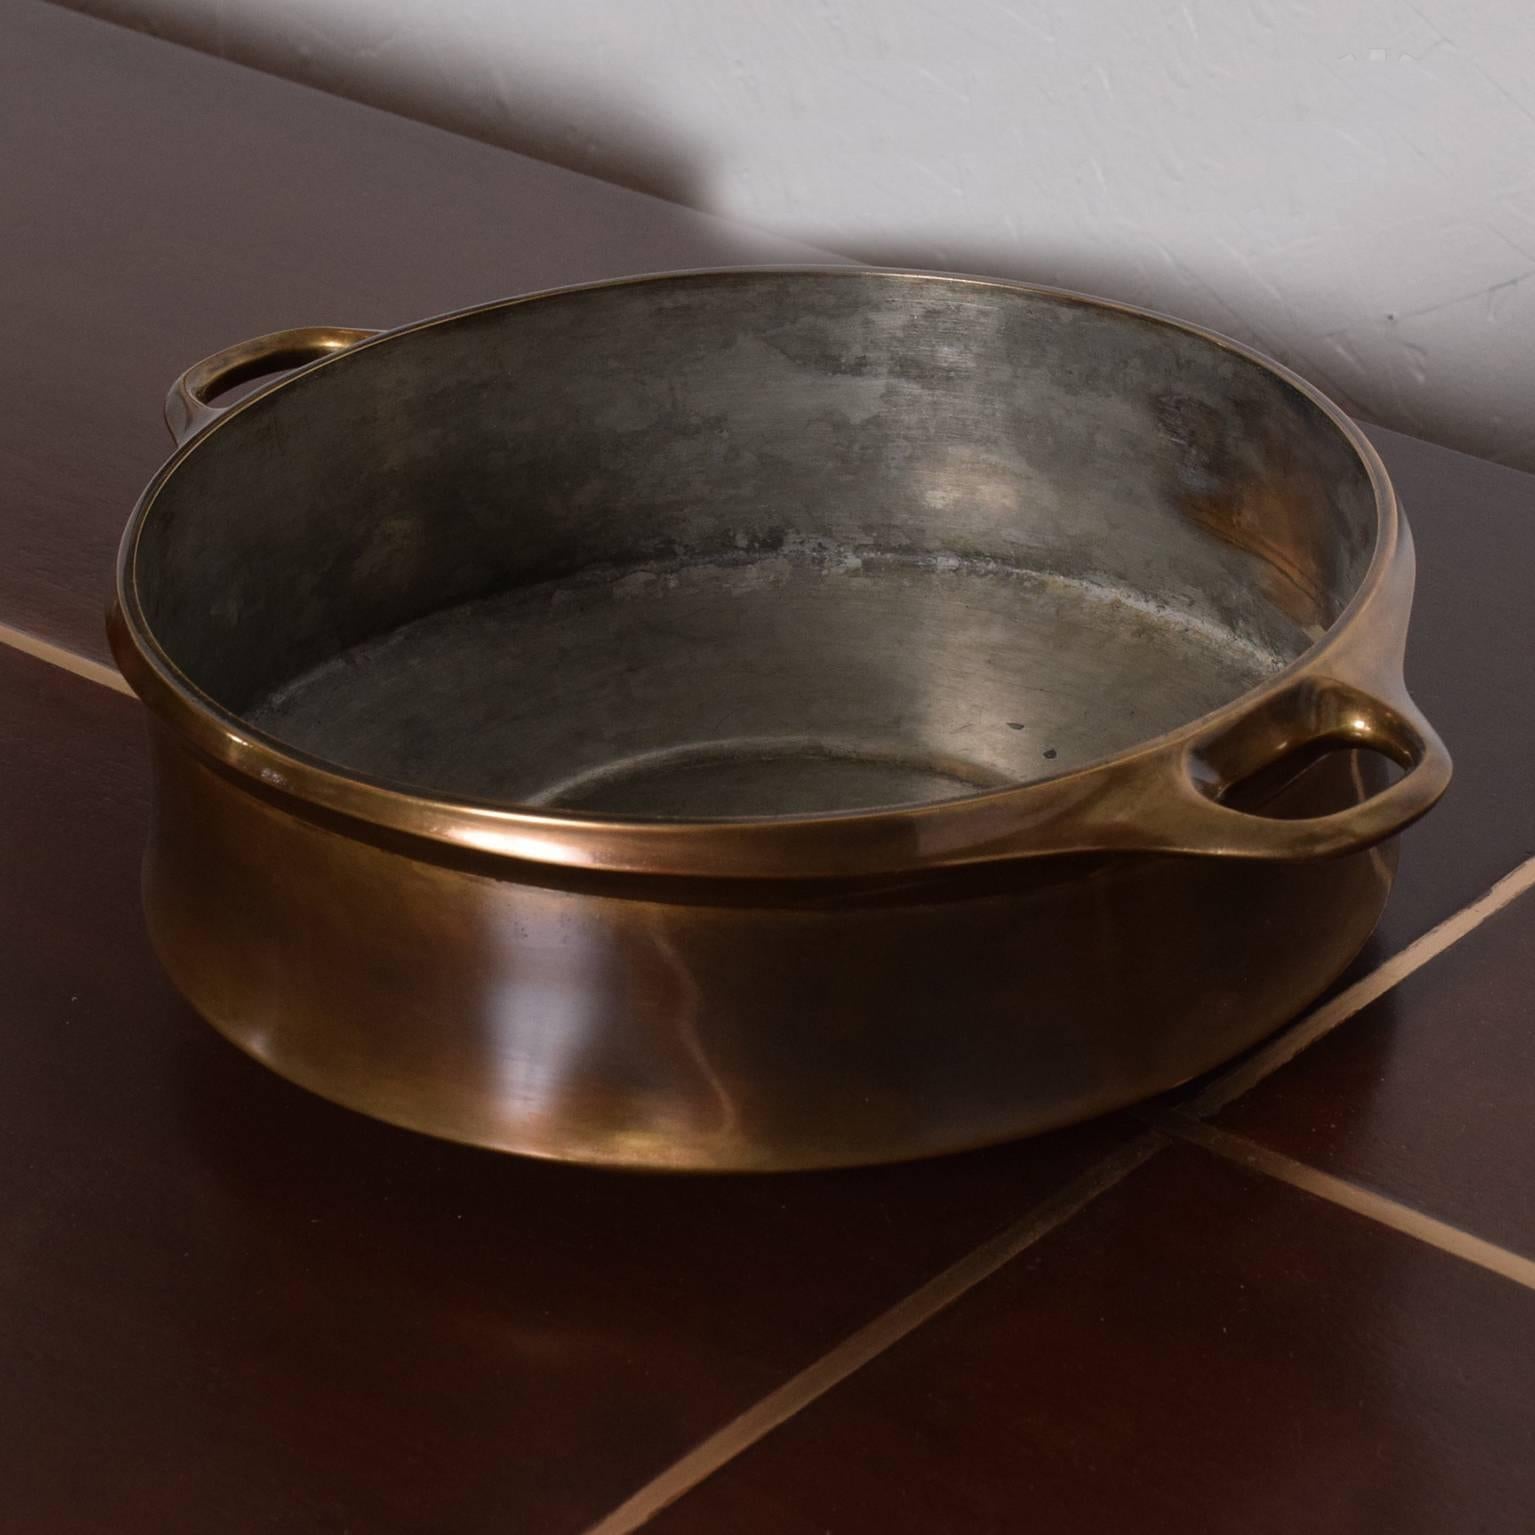 For your consideration, an early Dansk pot bowl with bronze finish midcentury Danish modern.
Denmark, late 1950s
Dimensions: 3 1/2